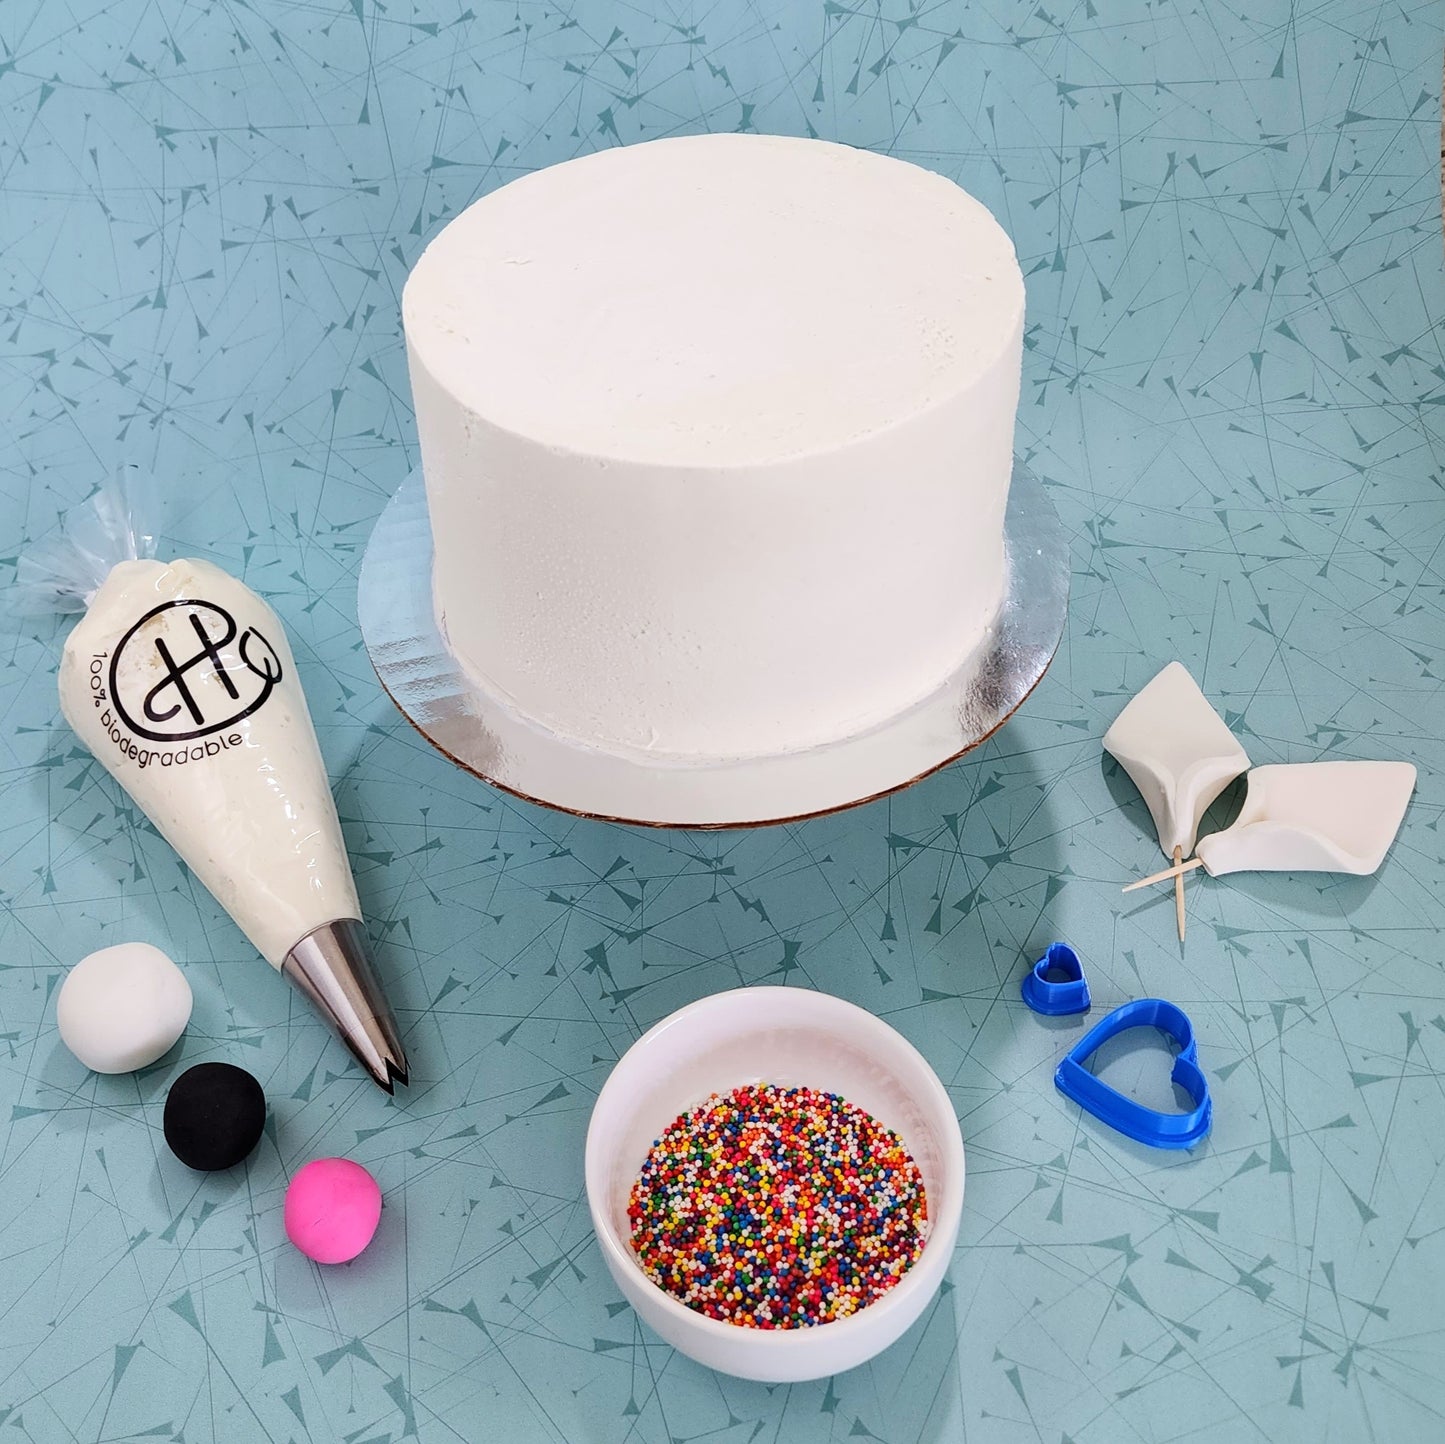 The components of "Shades of Rainbow" DIY cake-decorating kit, including white frosting, white, black, and pink fondant, heart fondant cutters, rainbow sprinkles, and premade white fondant ears.